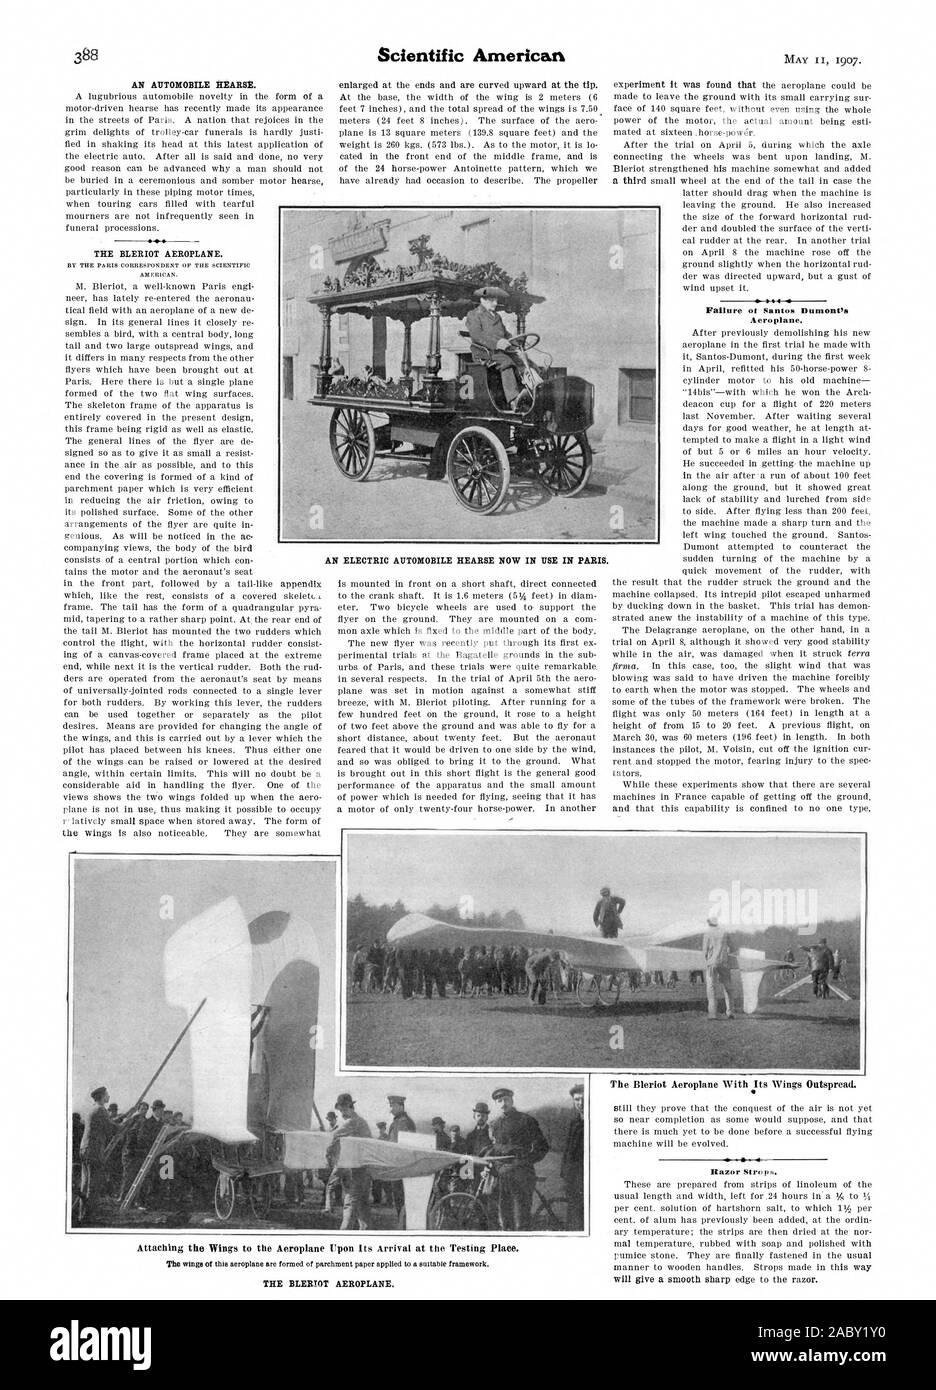 Failure of Santos Dumont's Aeroplane AN ELECTRIC AUTOMOBILE HEARSE NOW IN USE IN PARIS. The Bleriot Aeroplane With Its Wings Outspread. Razor Strops. THE BLERIOT AEROPLANE., scientific american, 1907-05-11 Stock Photo